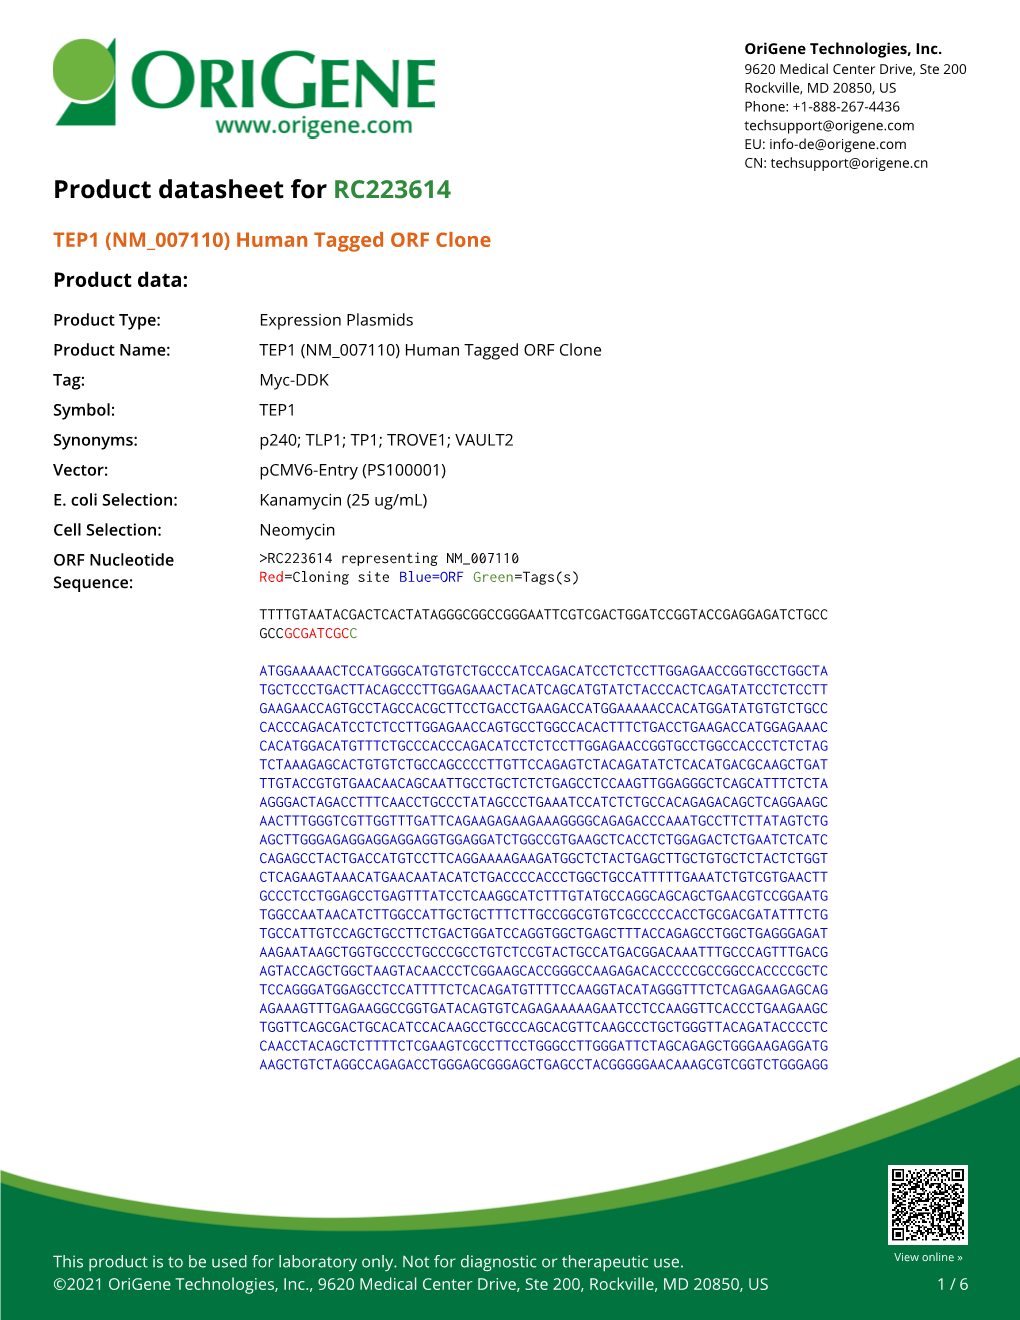 TEP1 (NM 007110) Human Tagged ORF Clone Product Data